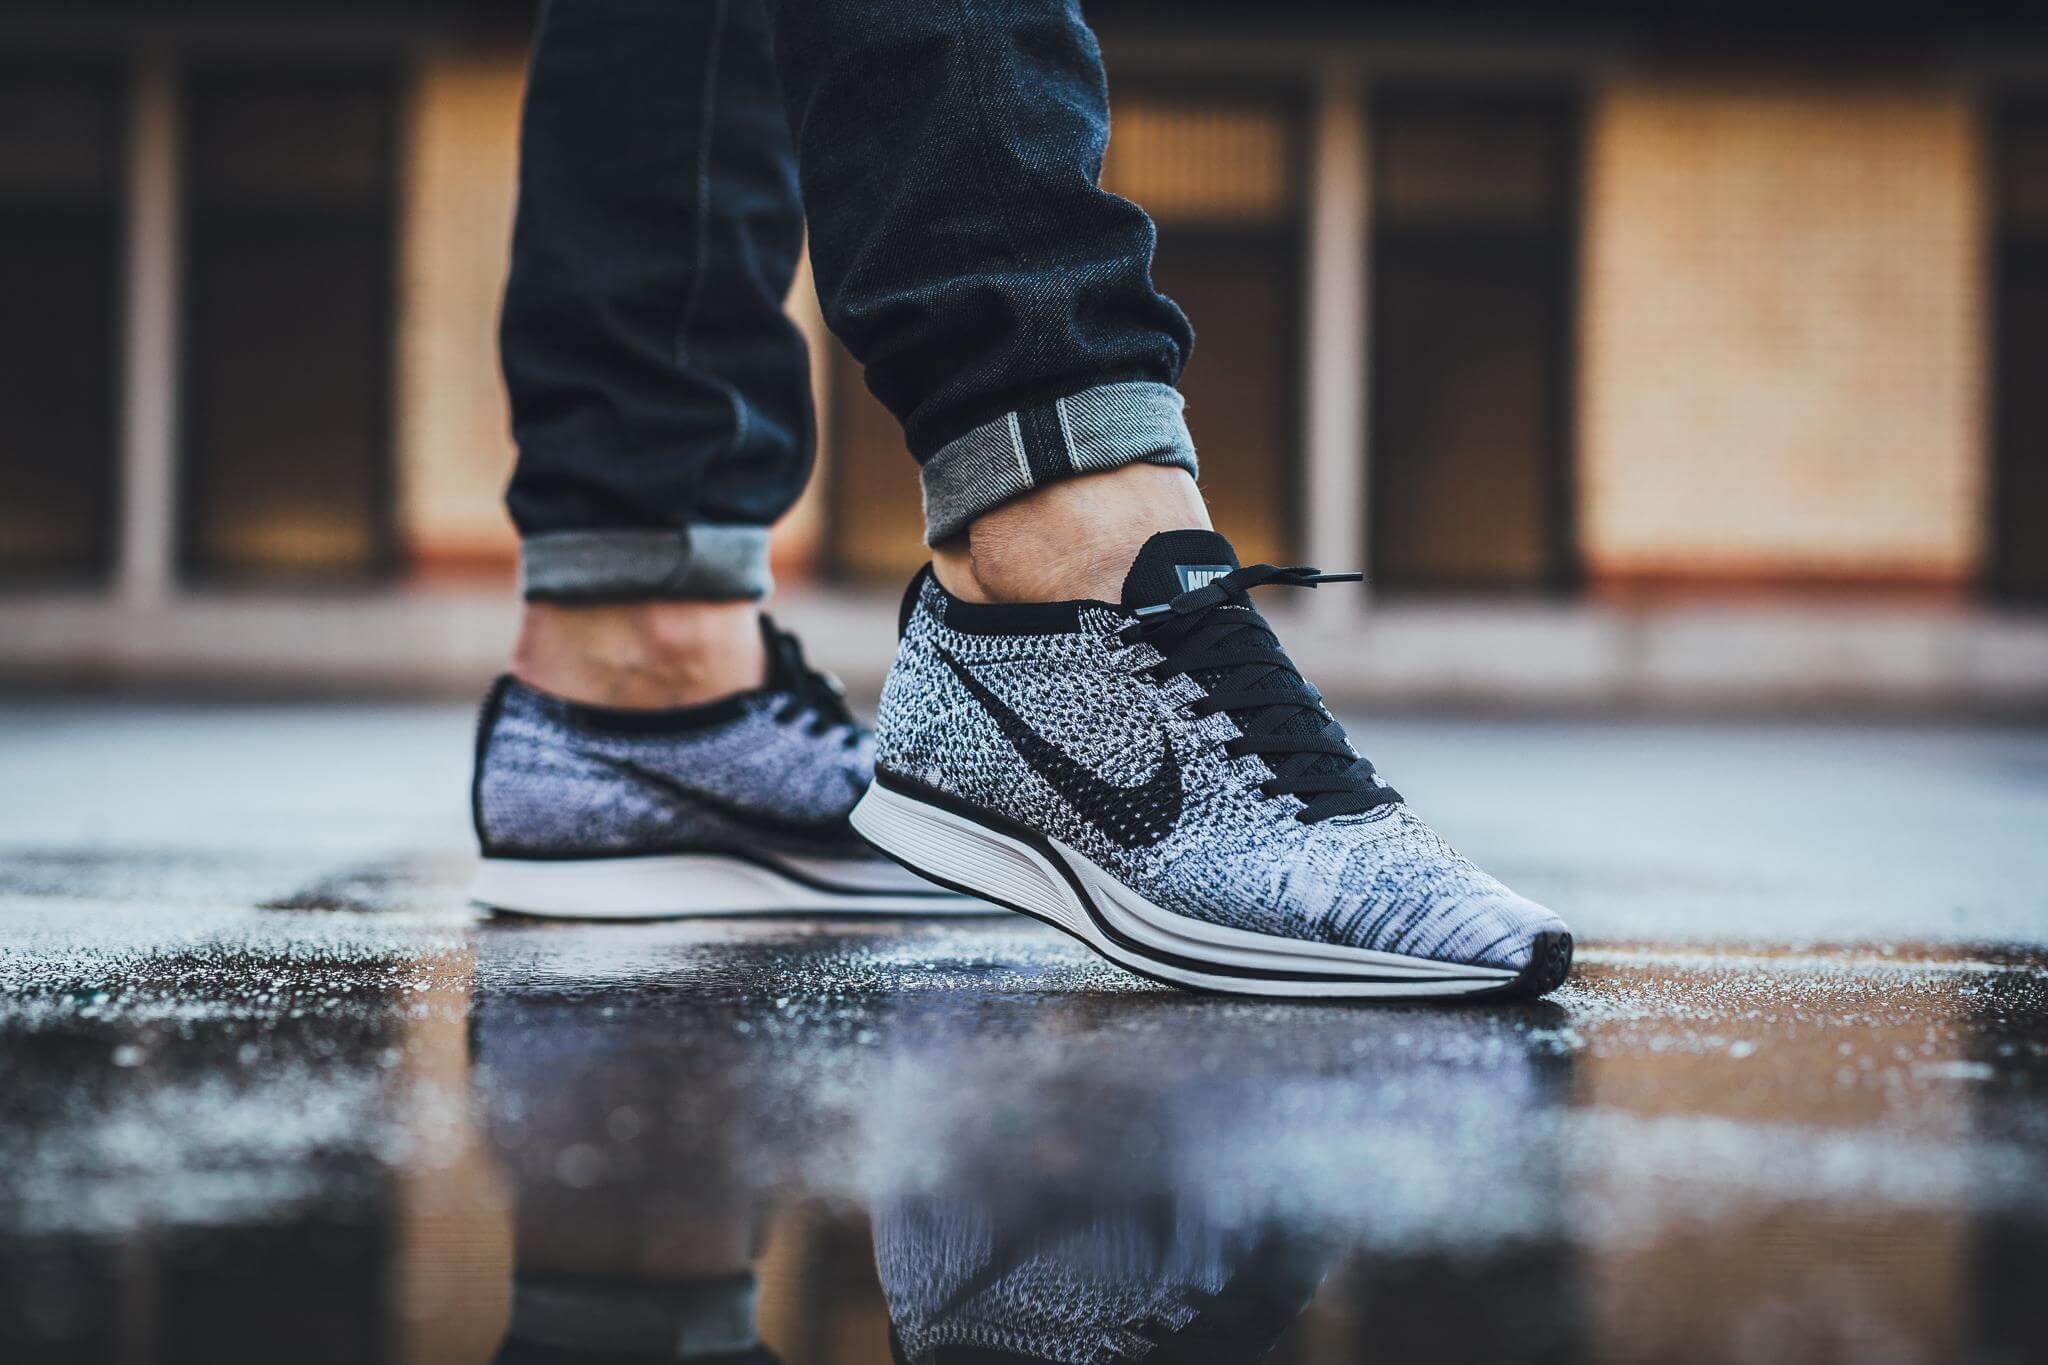 Nike Flyknit Black White | Where To Buy 526628-101 | The Supplier